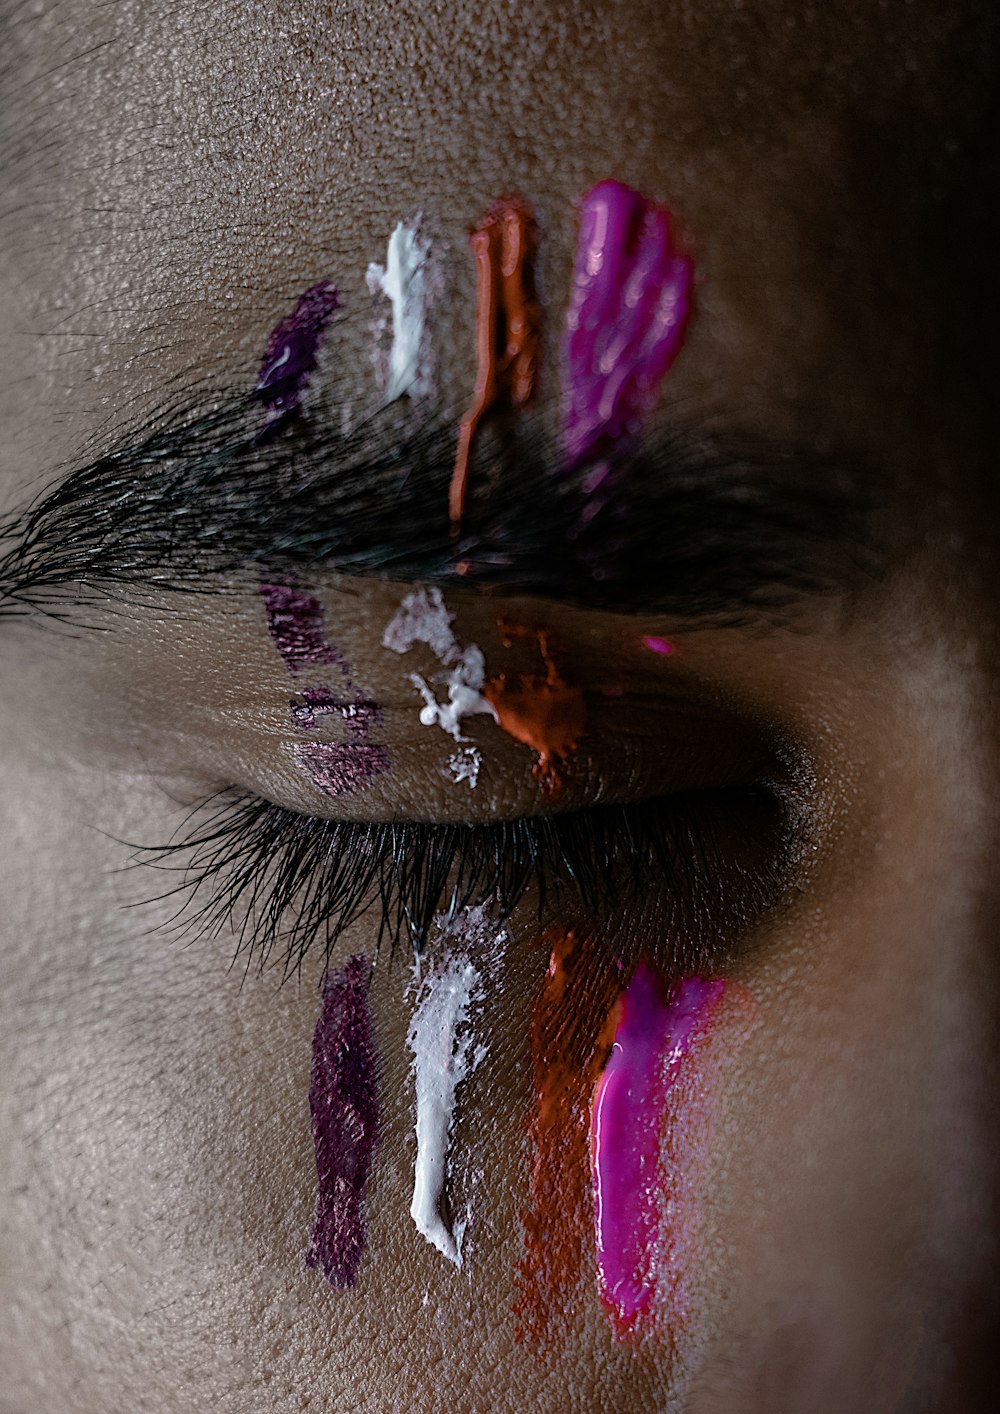 pink, red, white, and purple paints on man's eye